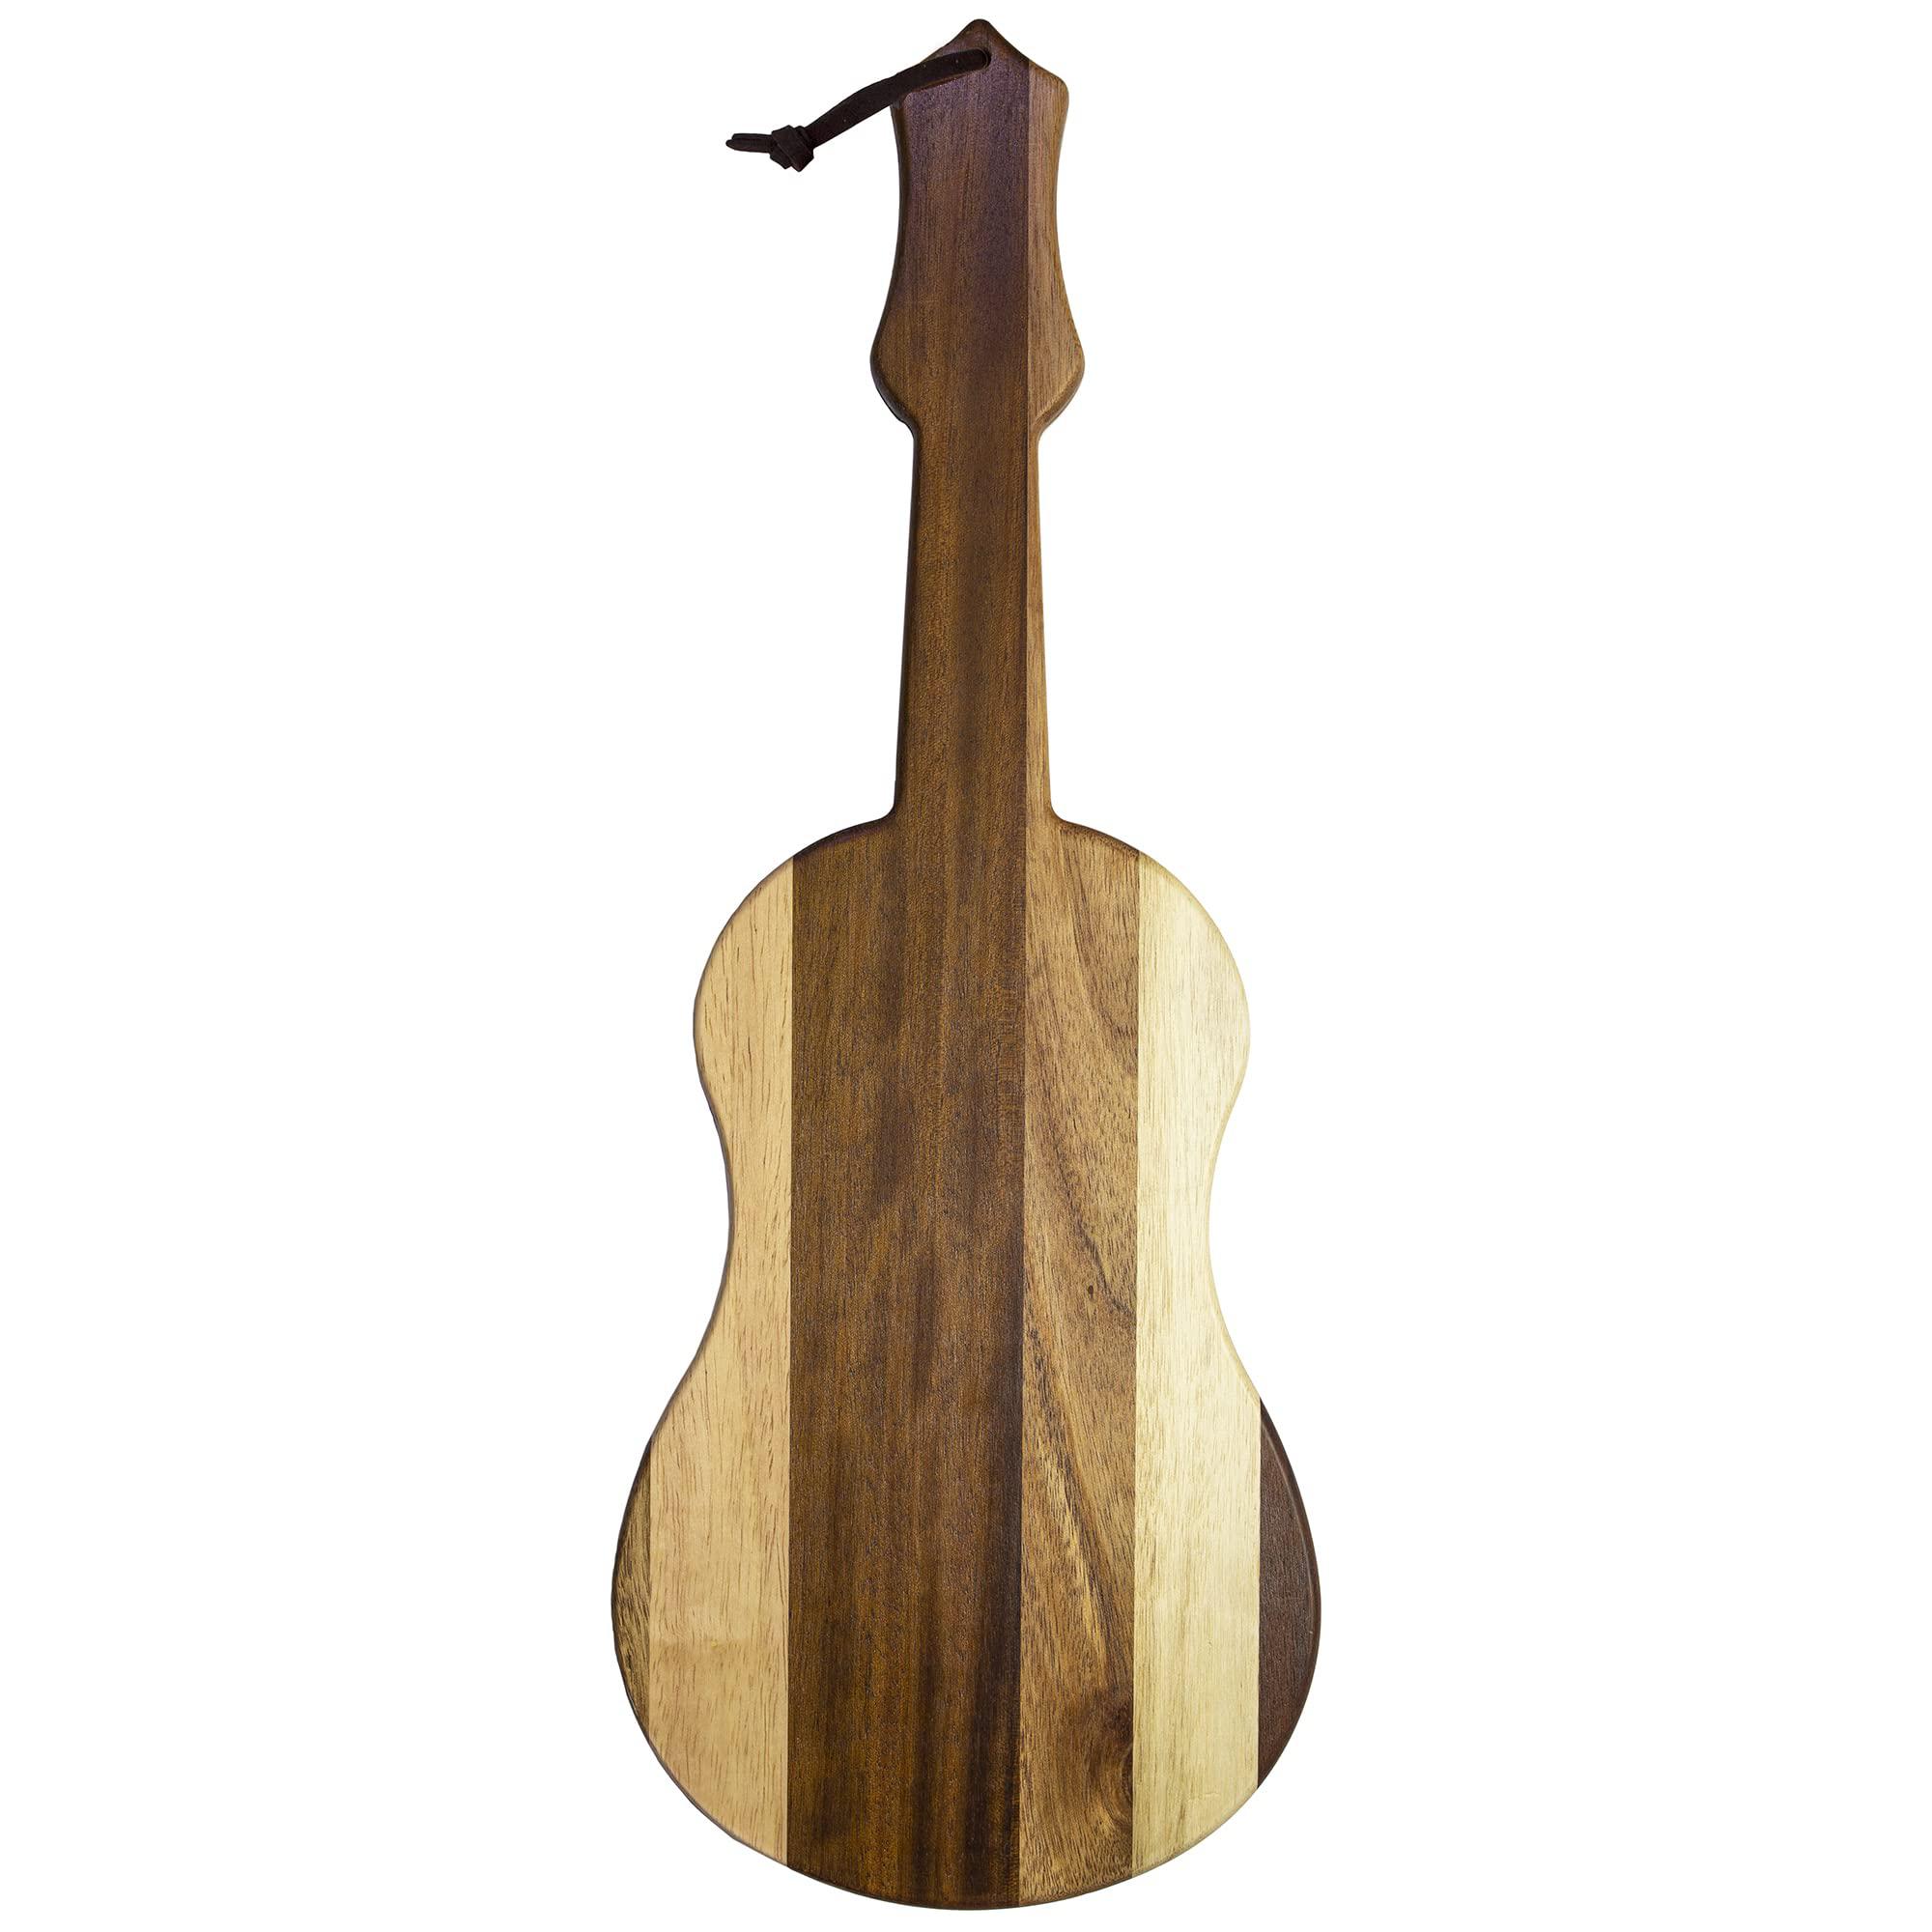 Totally Bamboo rock & branch series shiplap ukulele shaped wood serving and cutting board | great for wall art